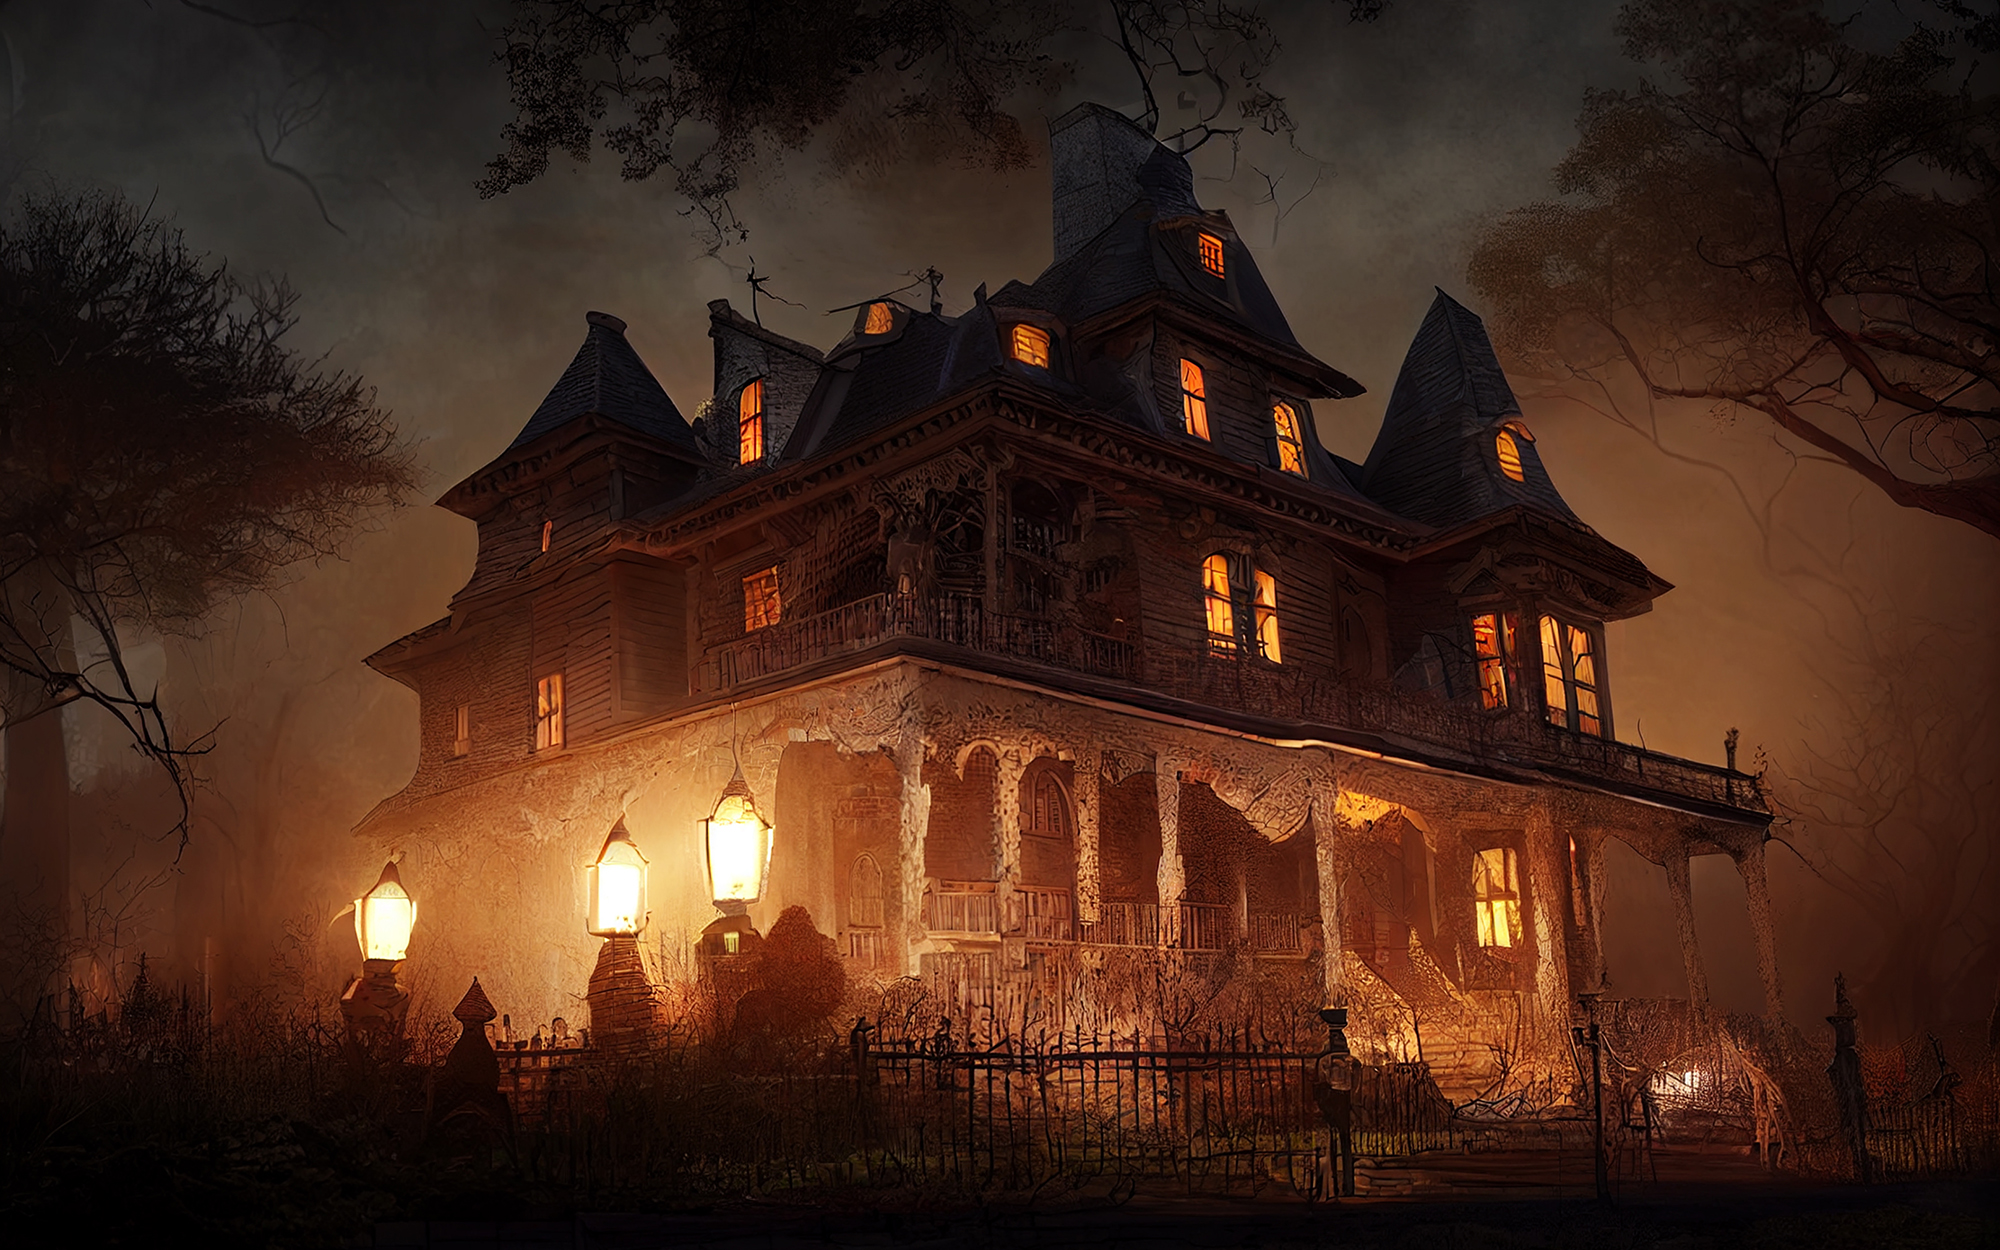 spooky old haunted house, lights in the windows, atmosphere foggy background